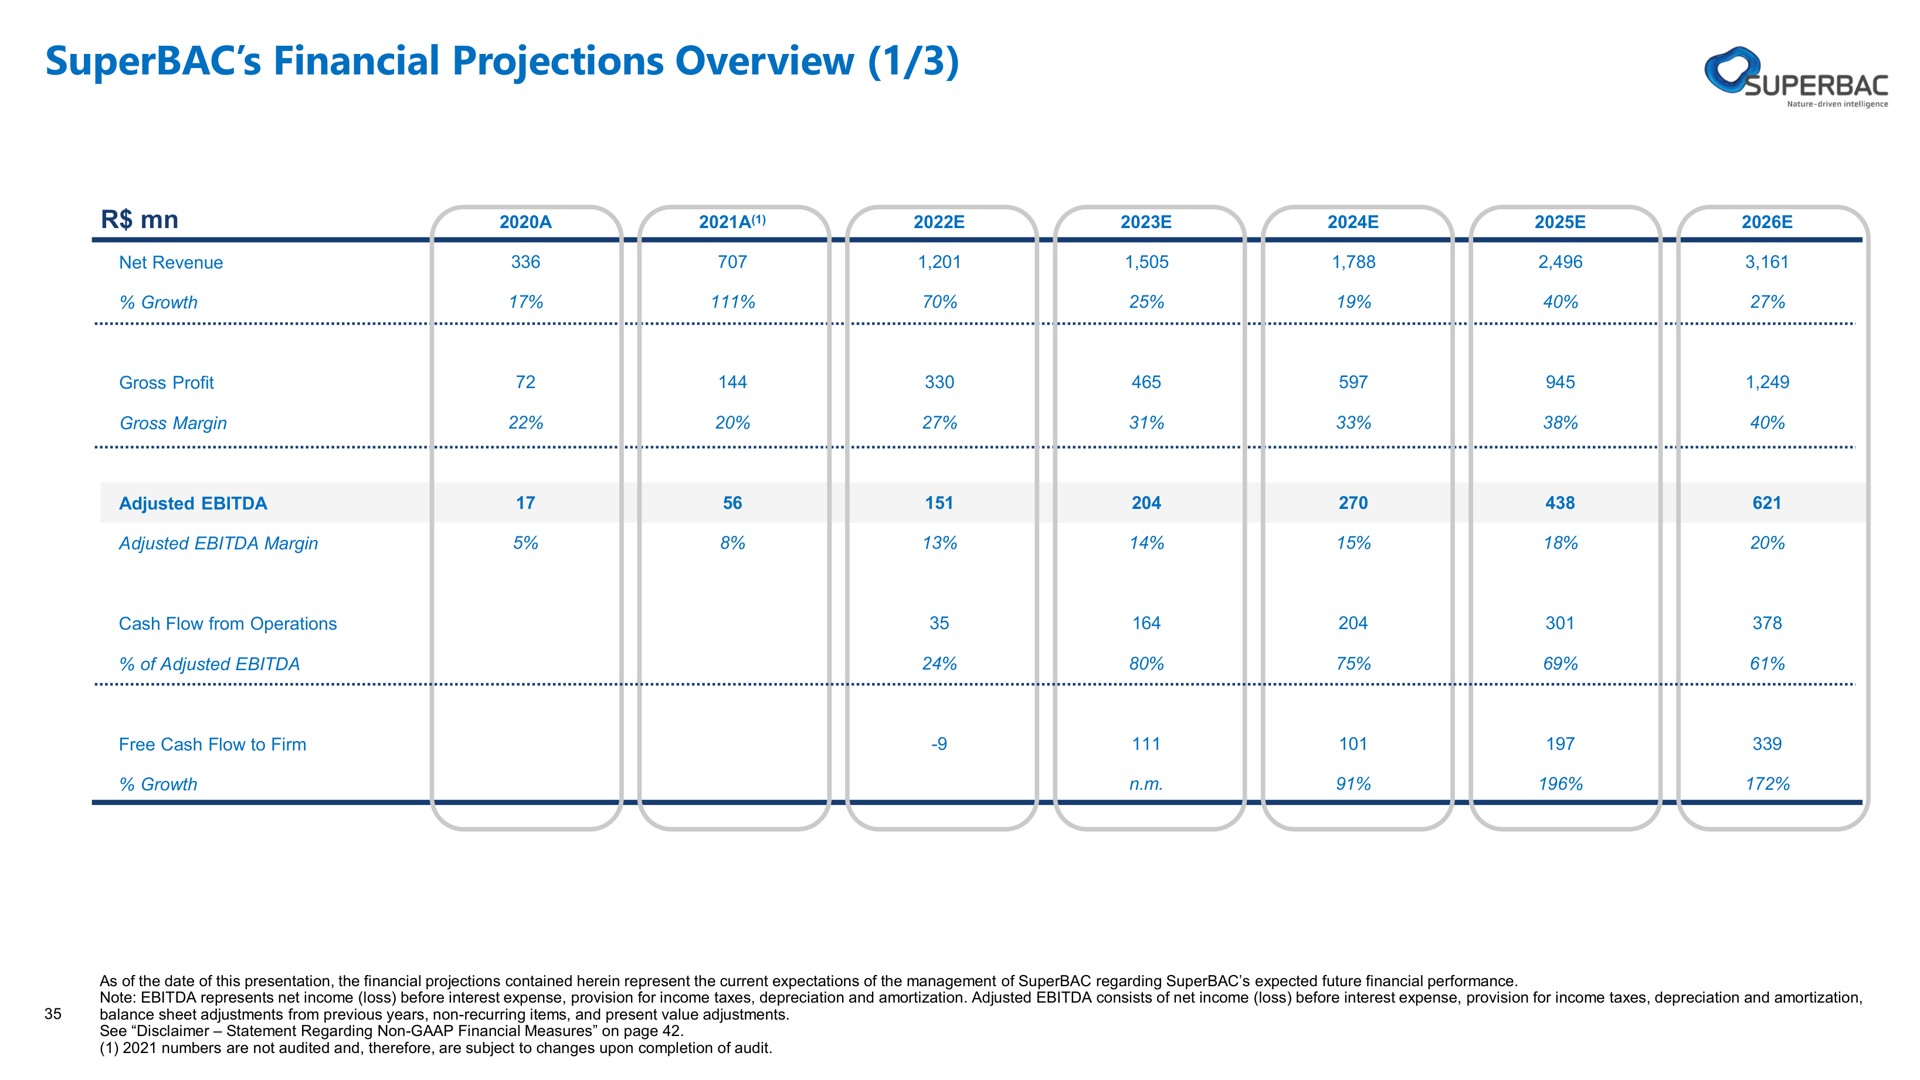 financial projections overview | Superbac